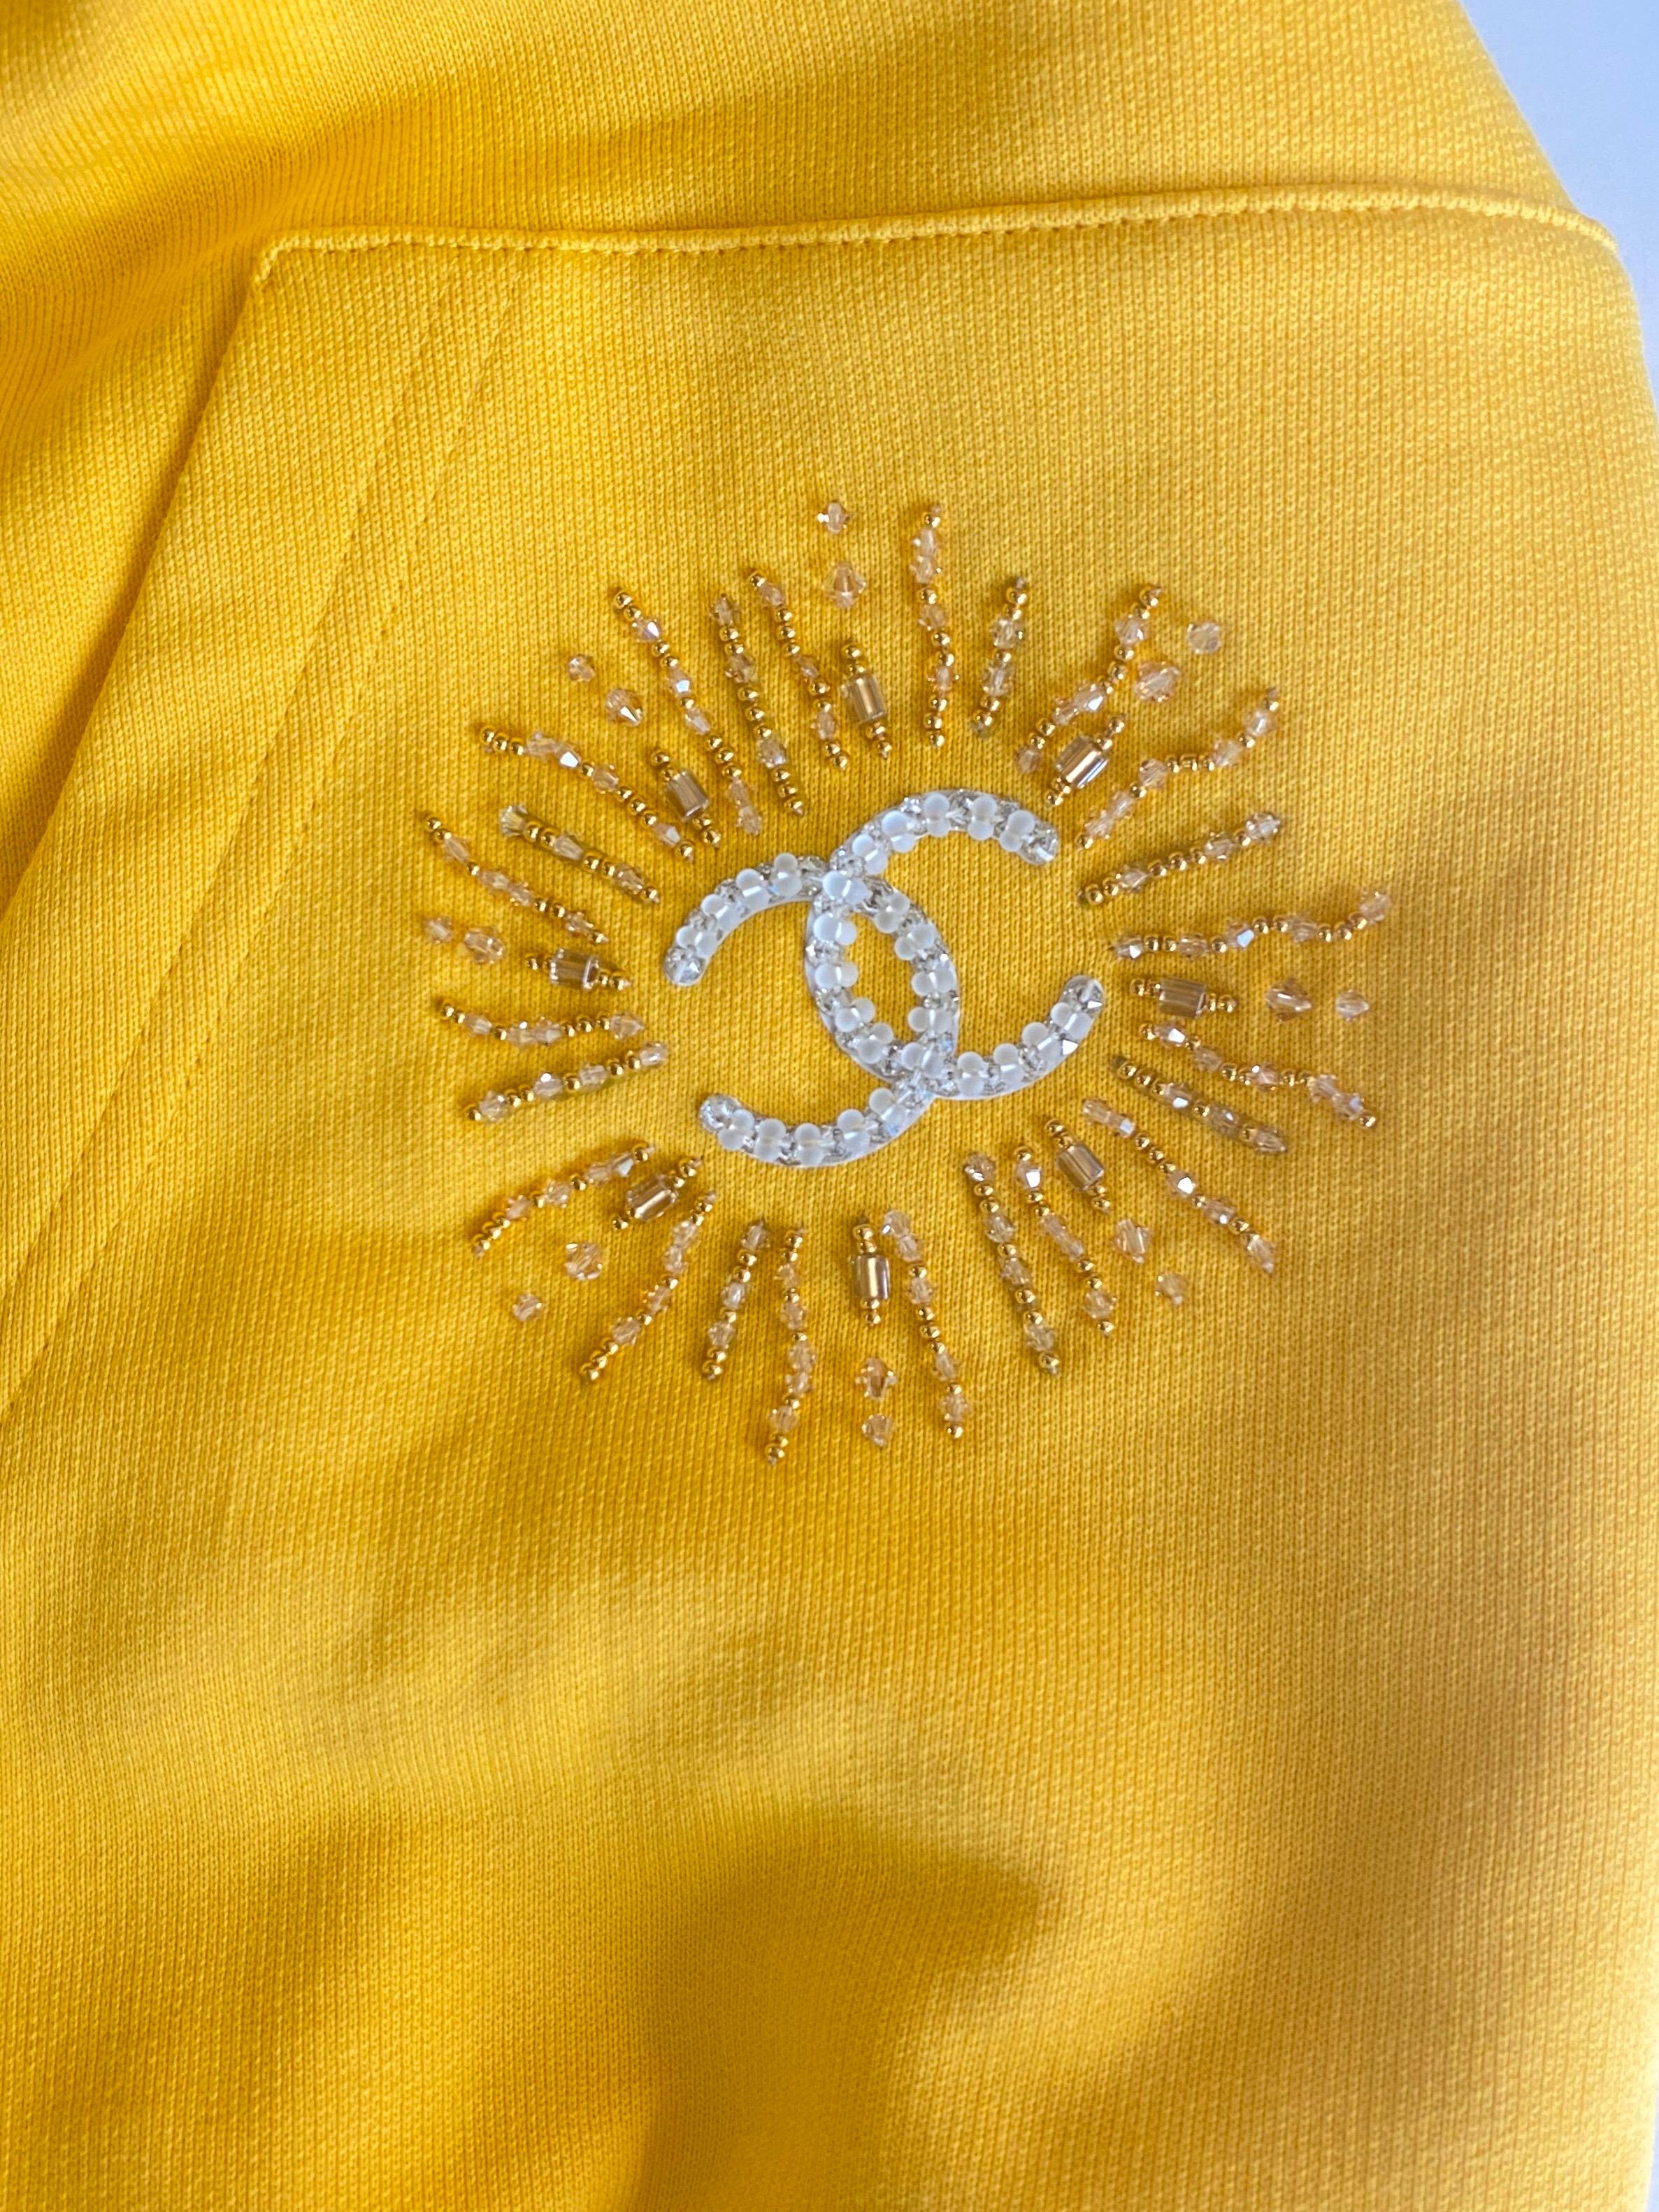 Chanel x Pharrell 2019 Chanel Appliqué Sunflower Yellow Hoodie  For Sale 6